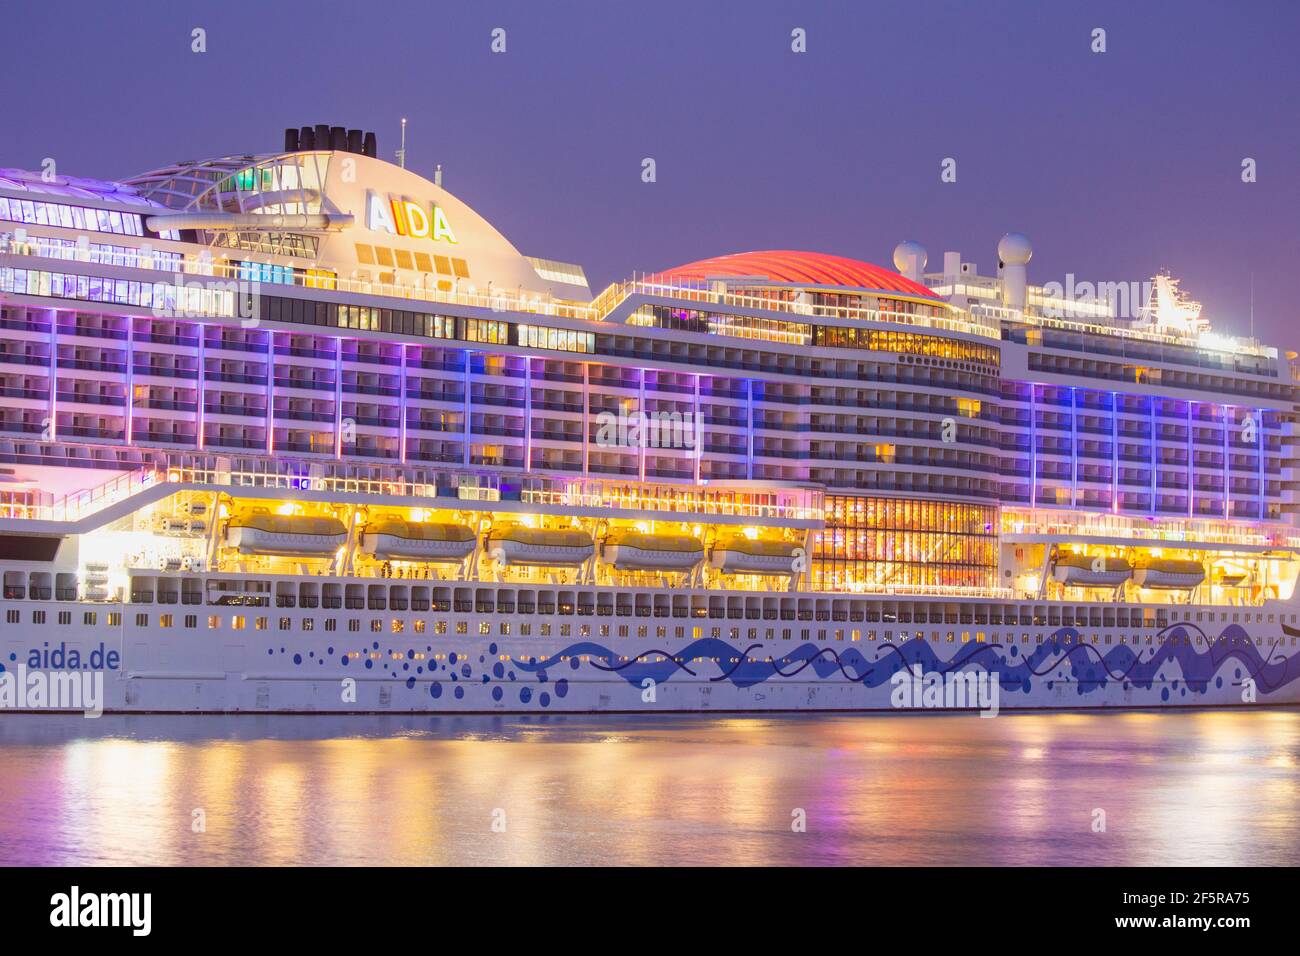 Cruise Ship Aida Night In High Resolution Stock Photography and Images -  Alamy